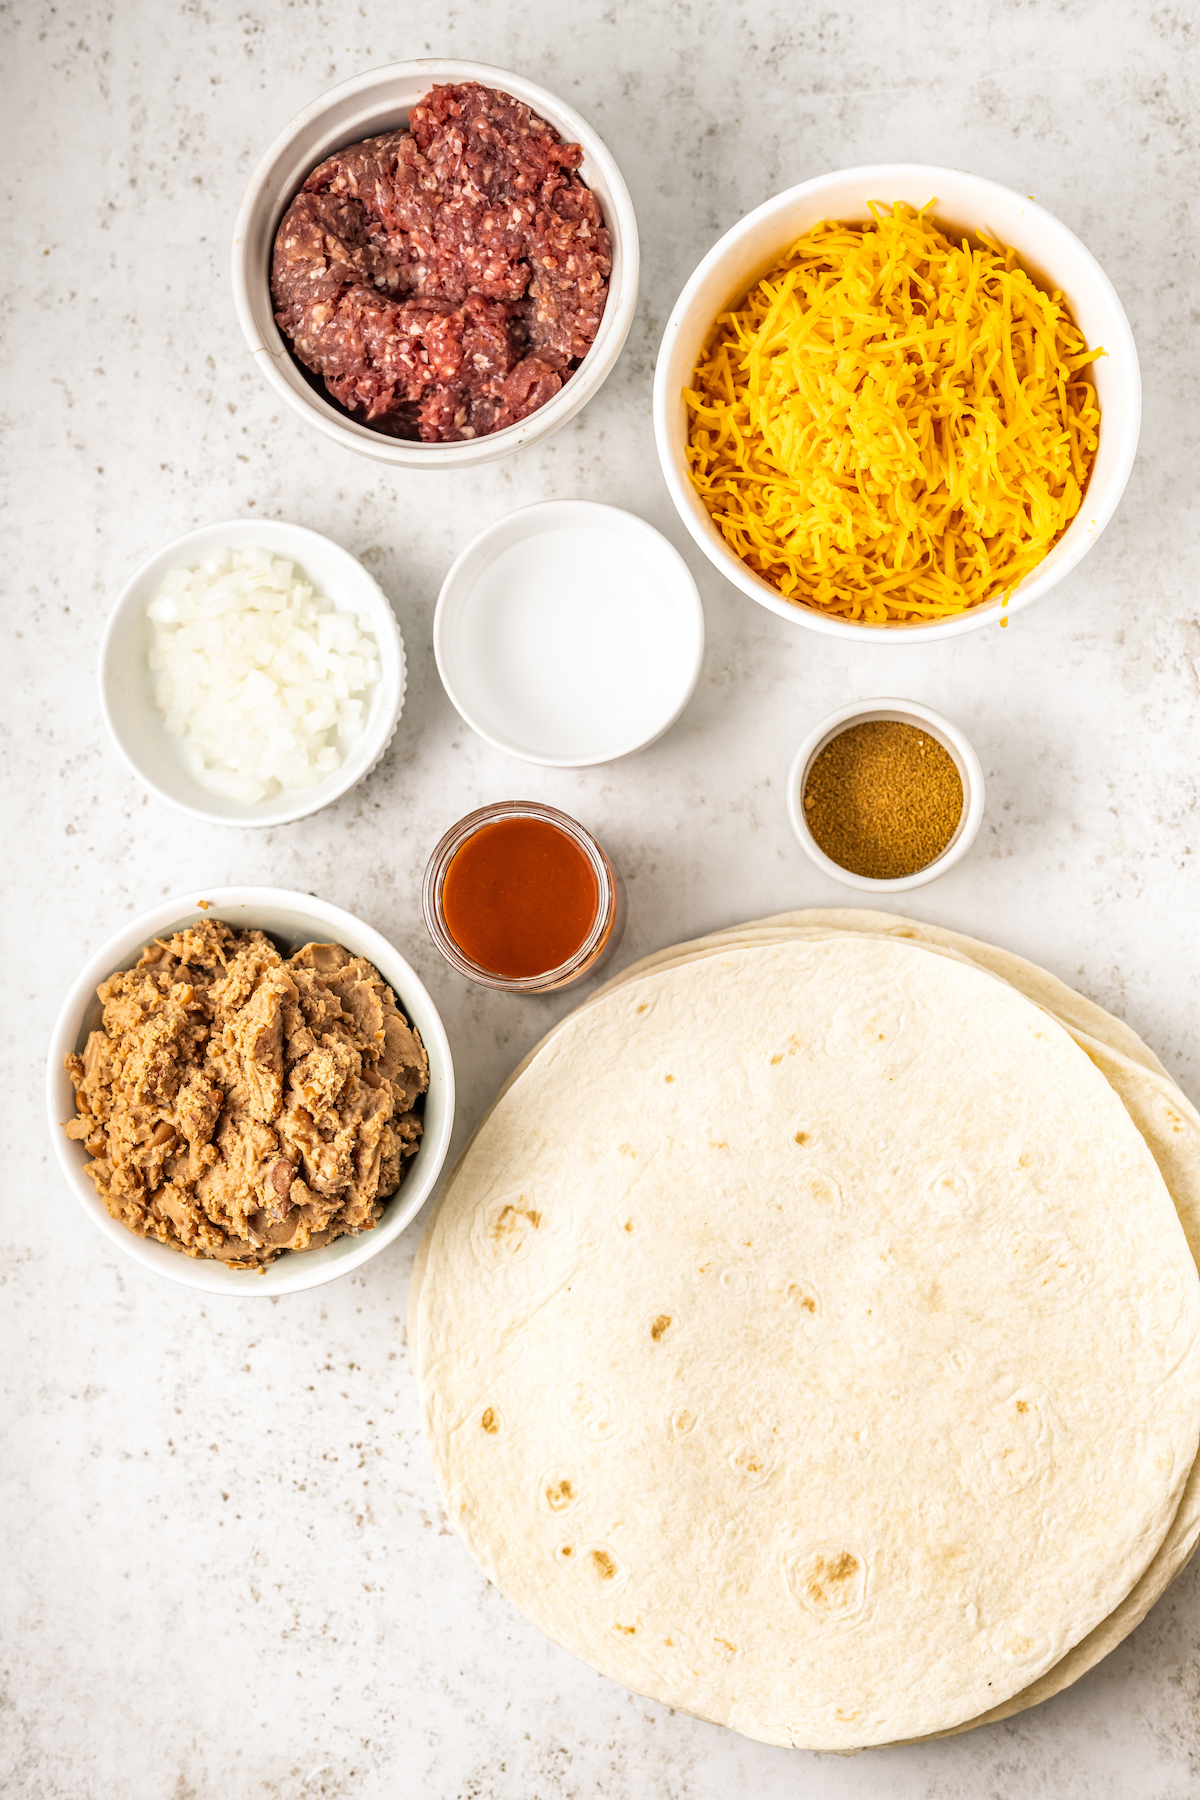 Ingredients needed for a Taco Bell enchirito recipe arranged in bowls on a countertop.